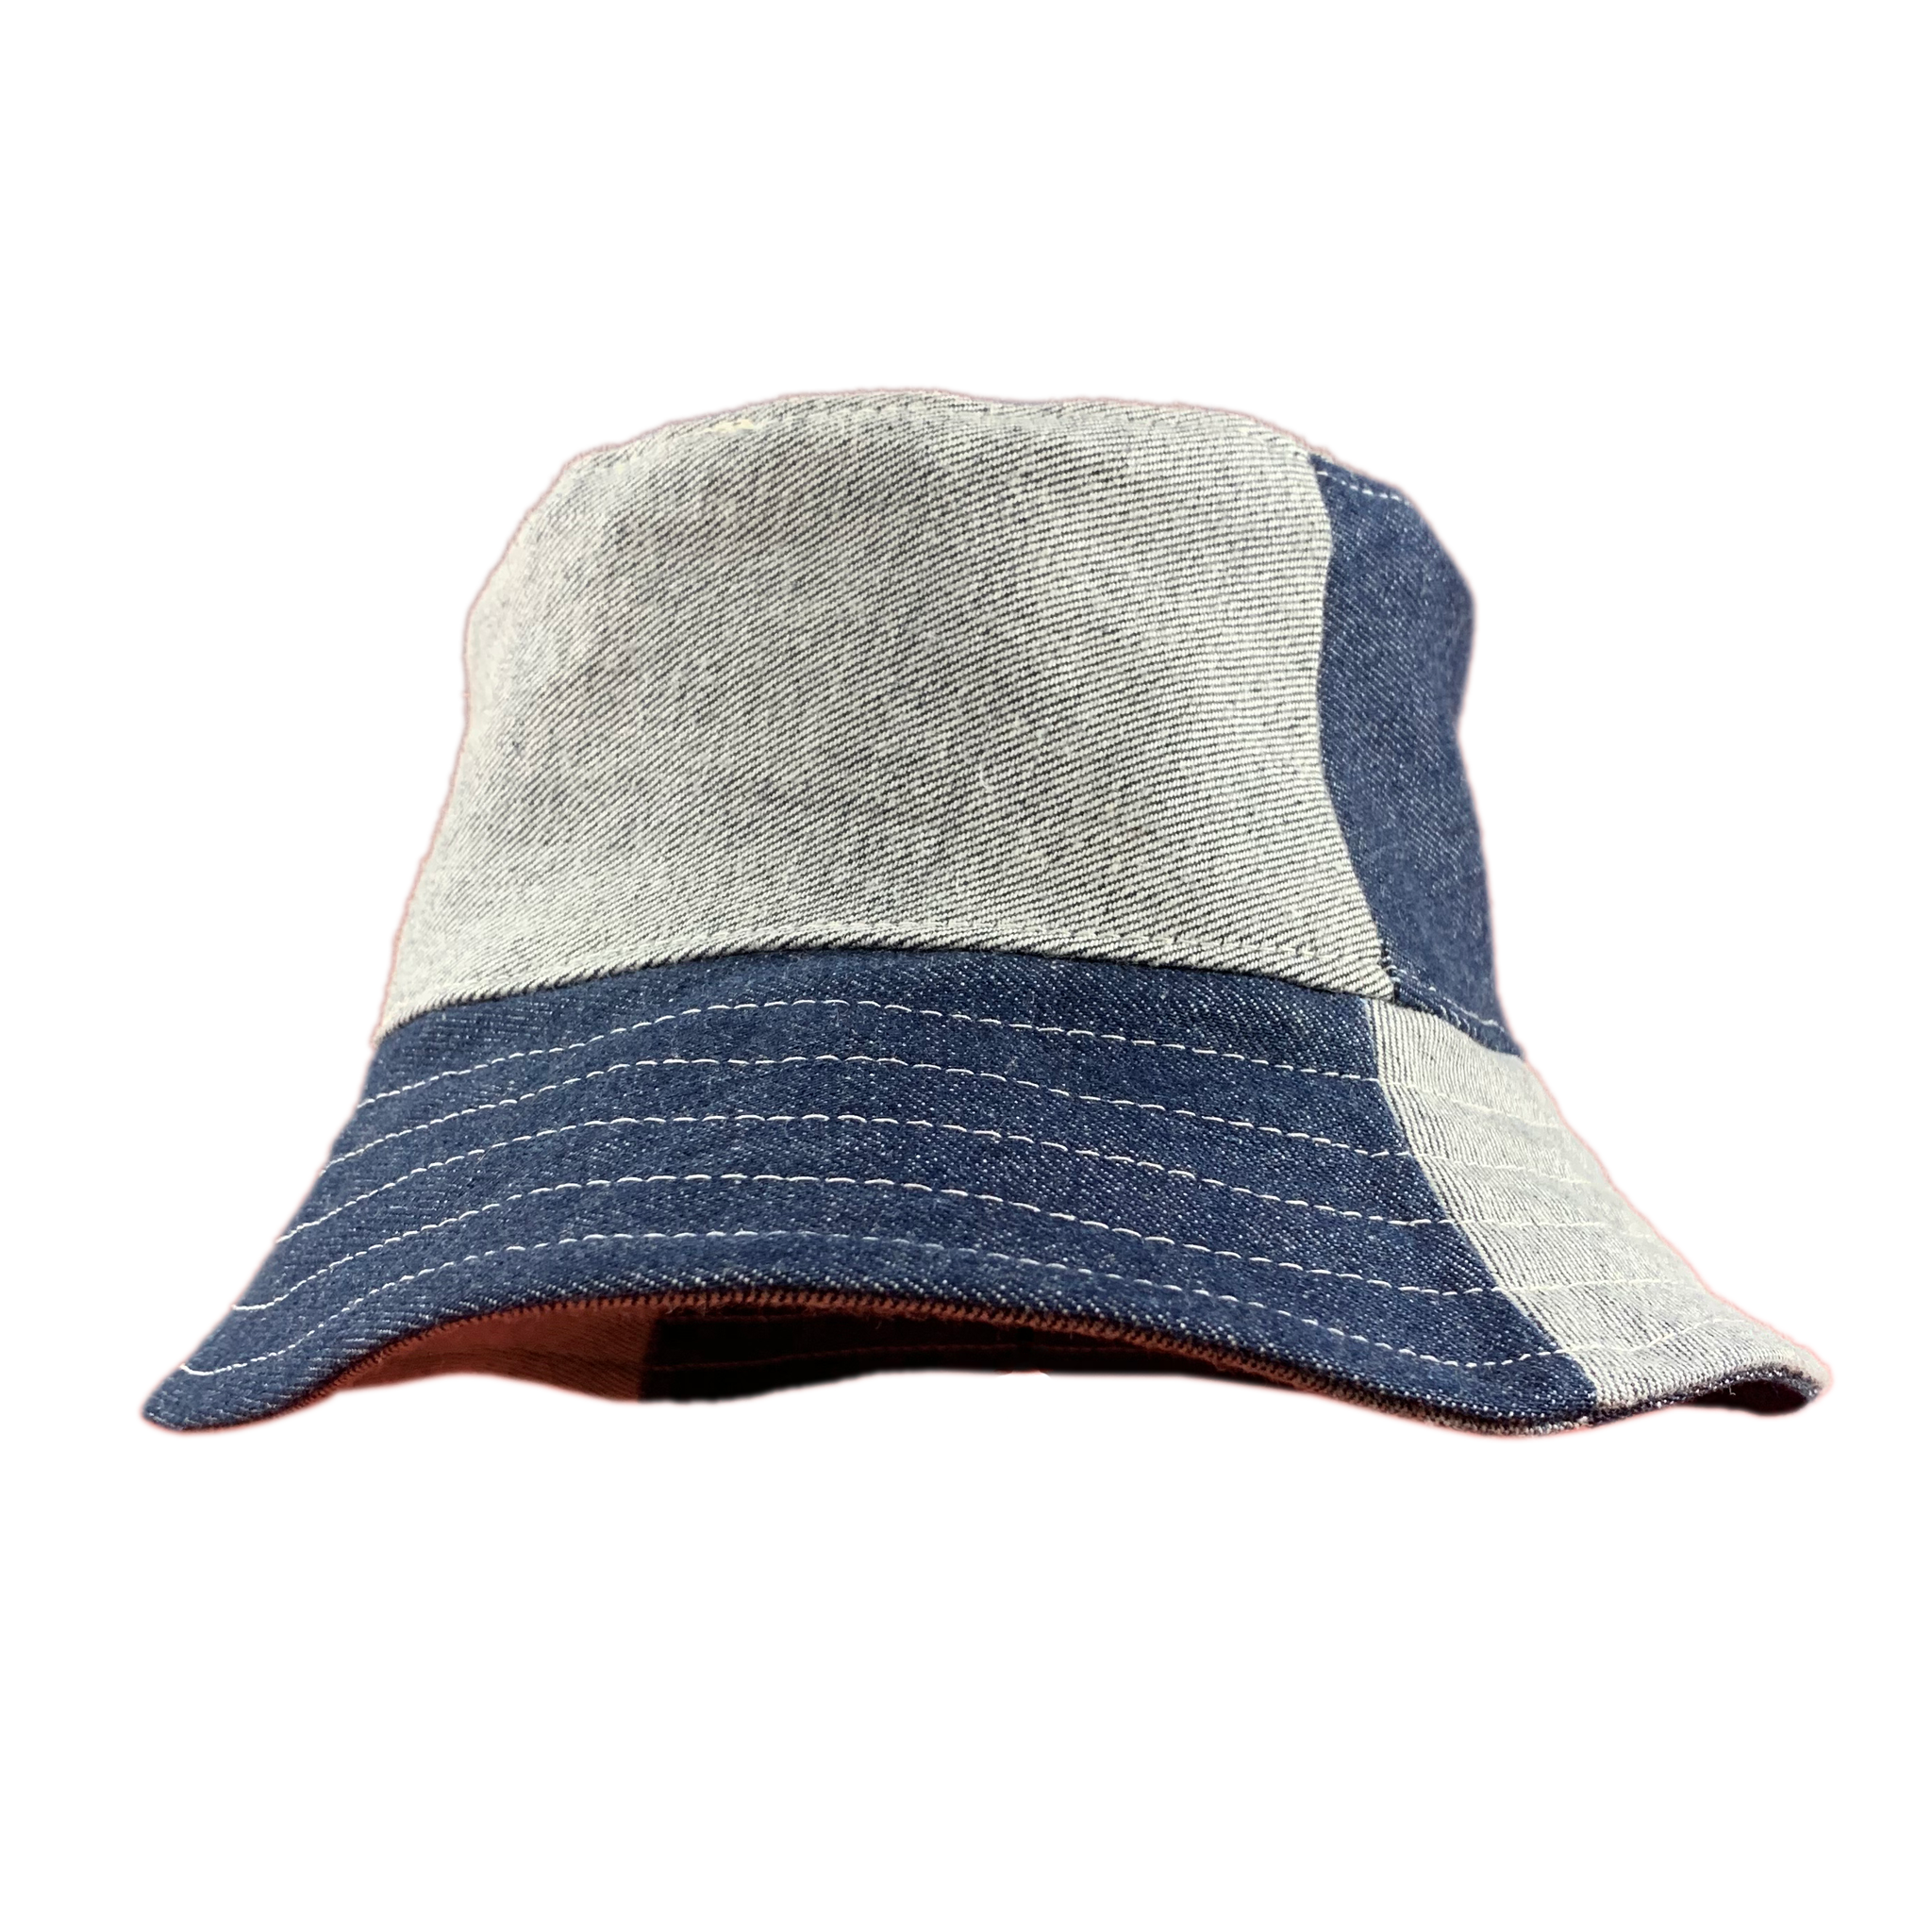 Hand Made Embroidered Bucket Hat - Small